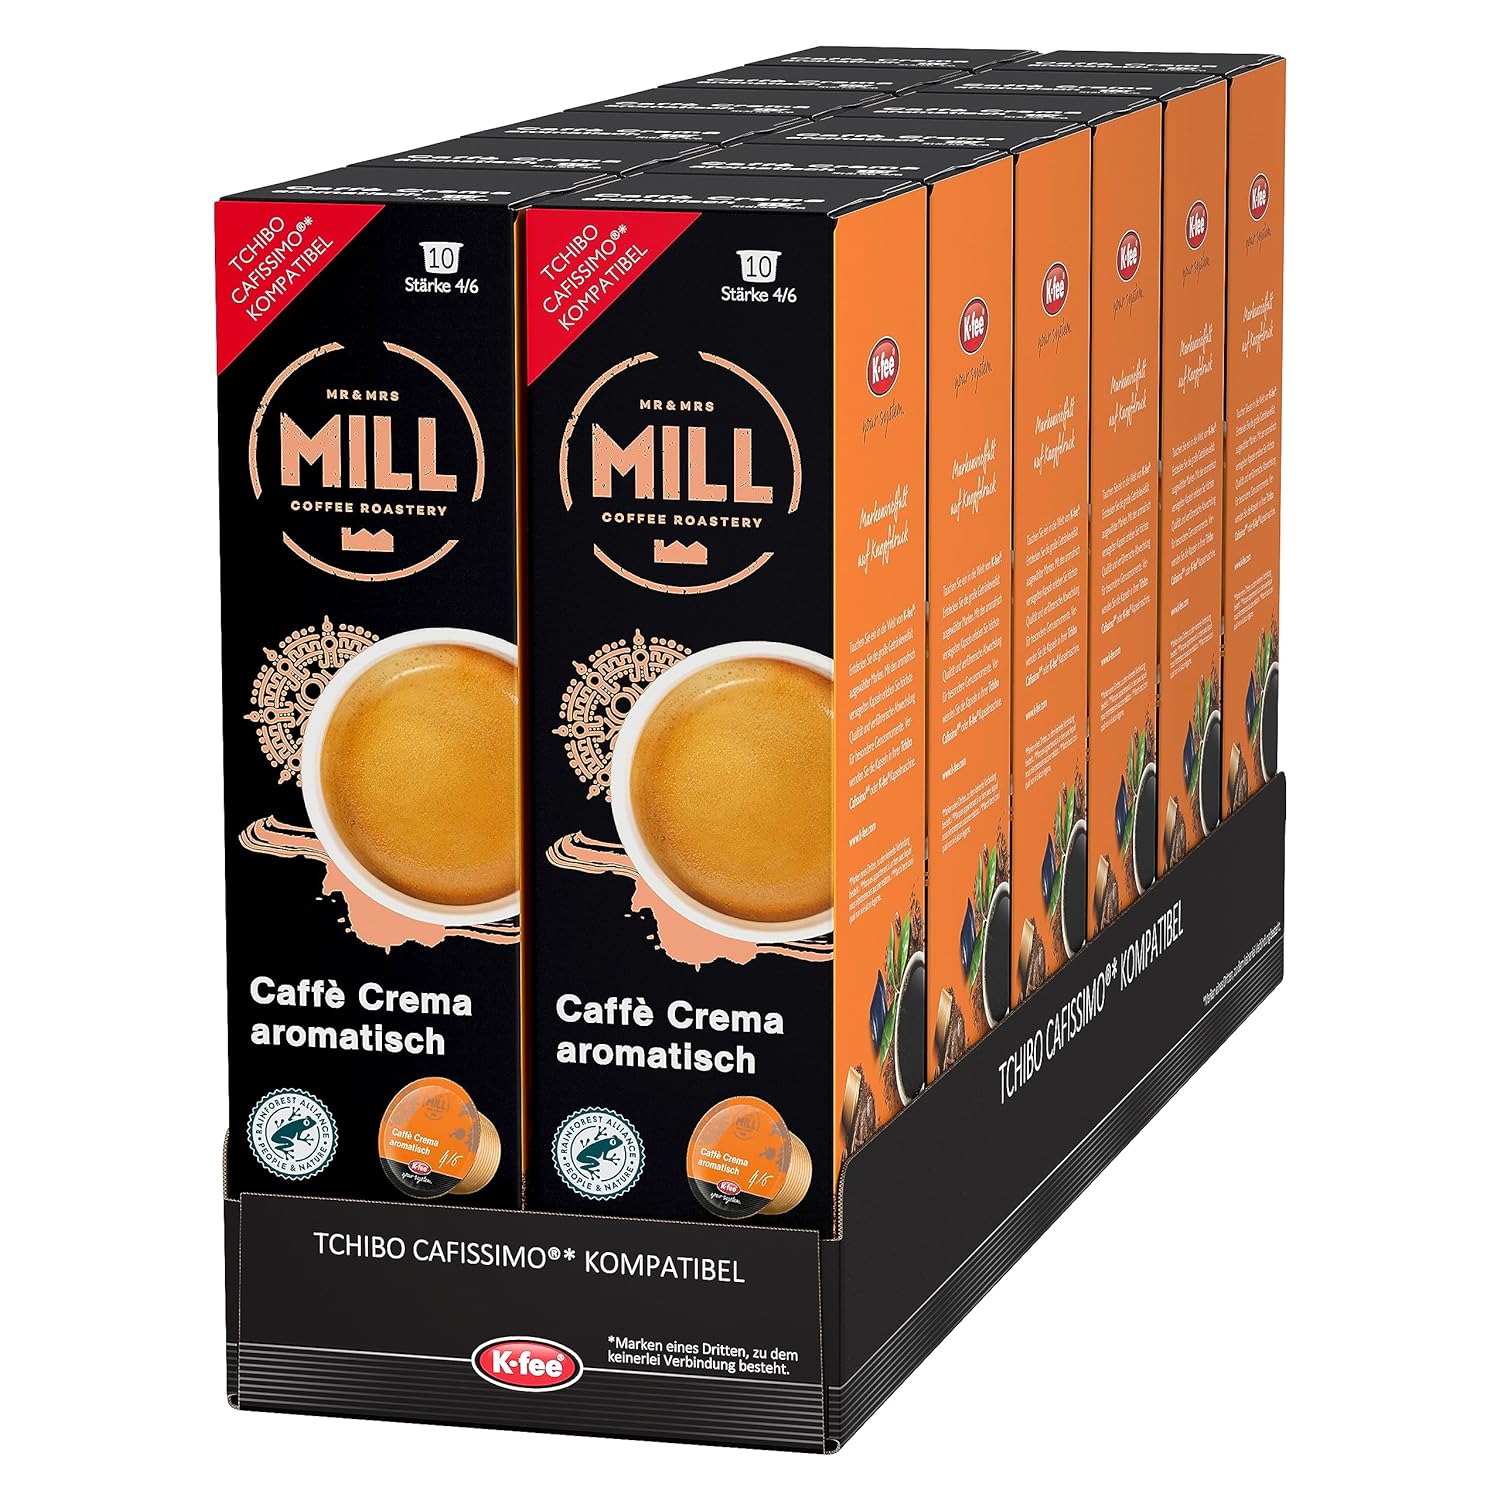 MR & MRS Mill Capsules Caffè Crema Aromatic, Strength 4/6, Compatible with K-Fee & Tchibo Cafissimo*, Rainforest Alliance Certified, 120 Capsules (12 x 10)